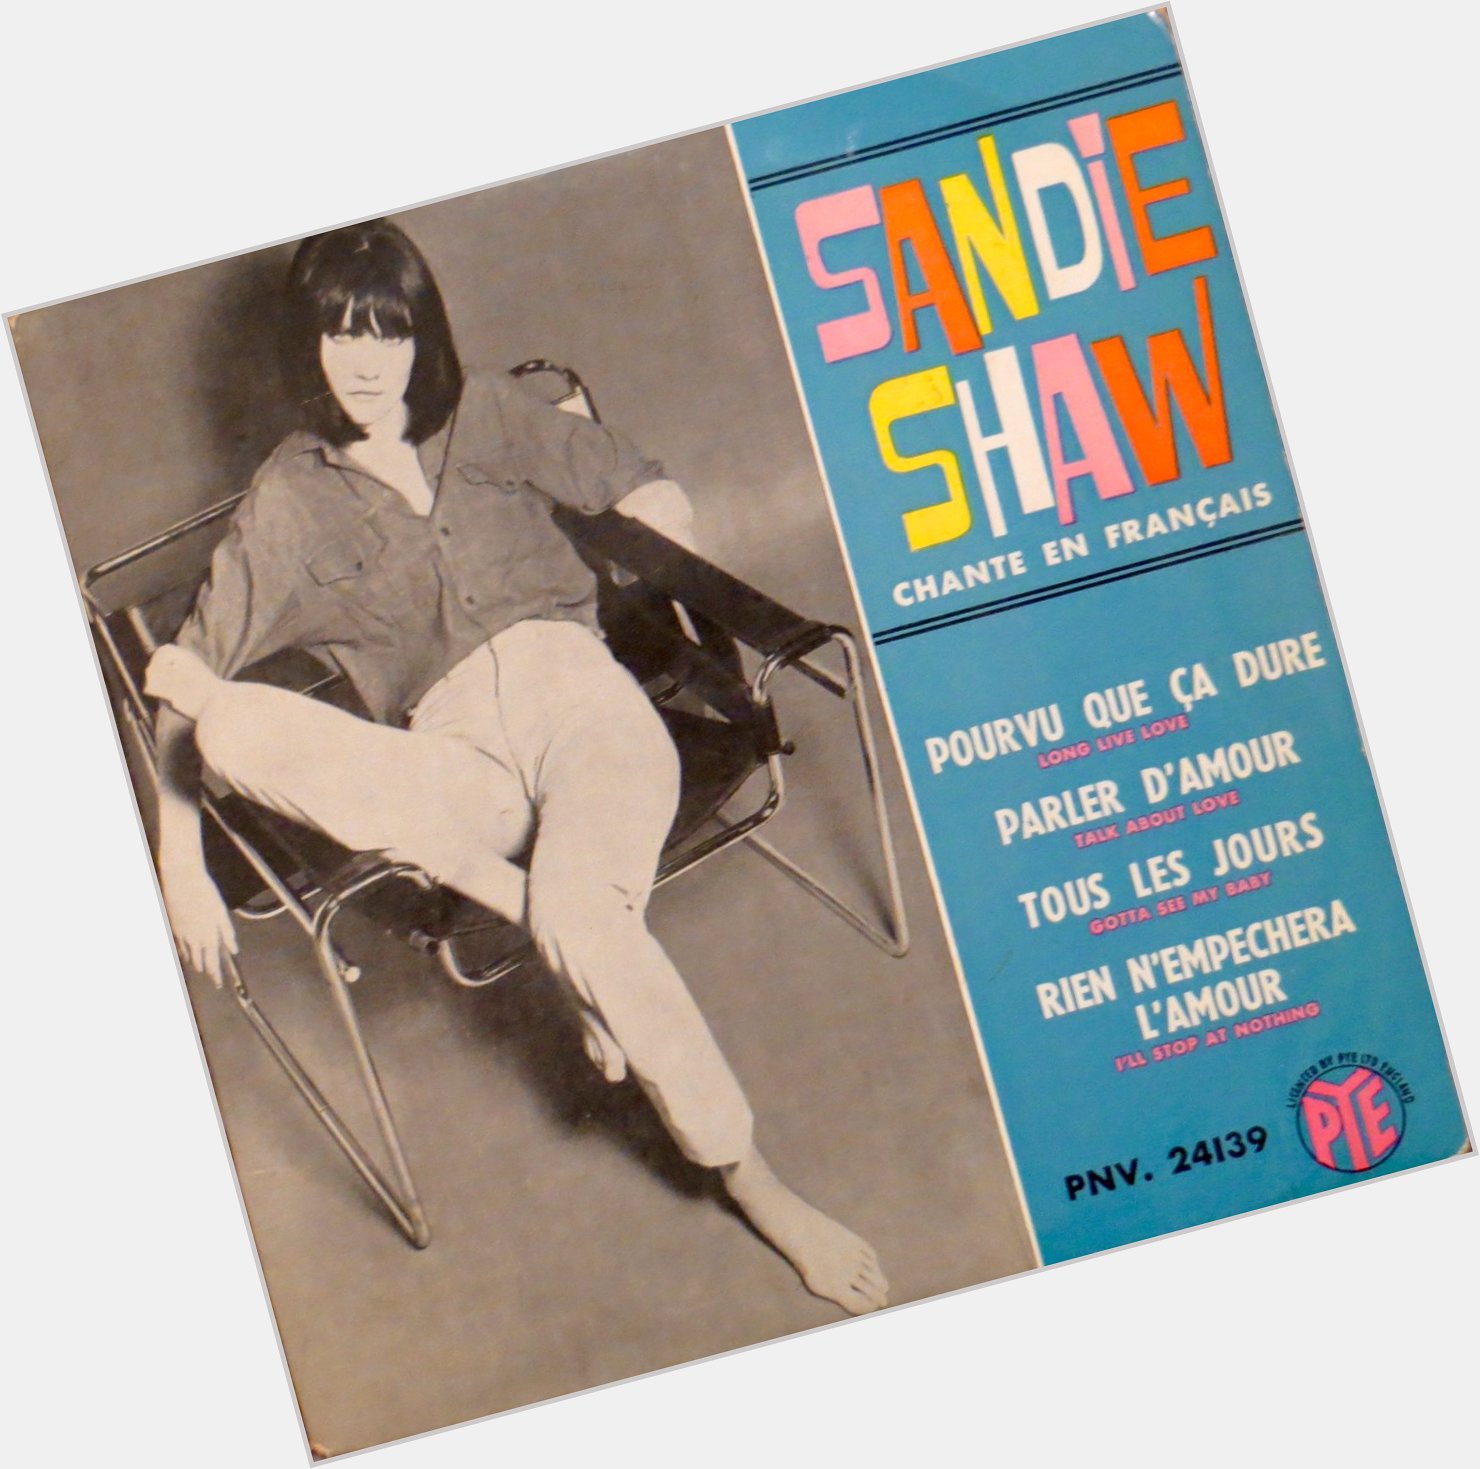 Happy birthday to Sandie Shaw, pictured here looking very cool in a Breuer chair 